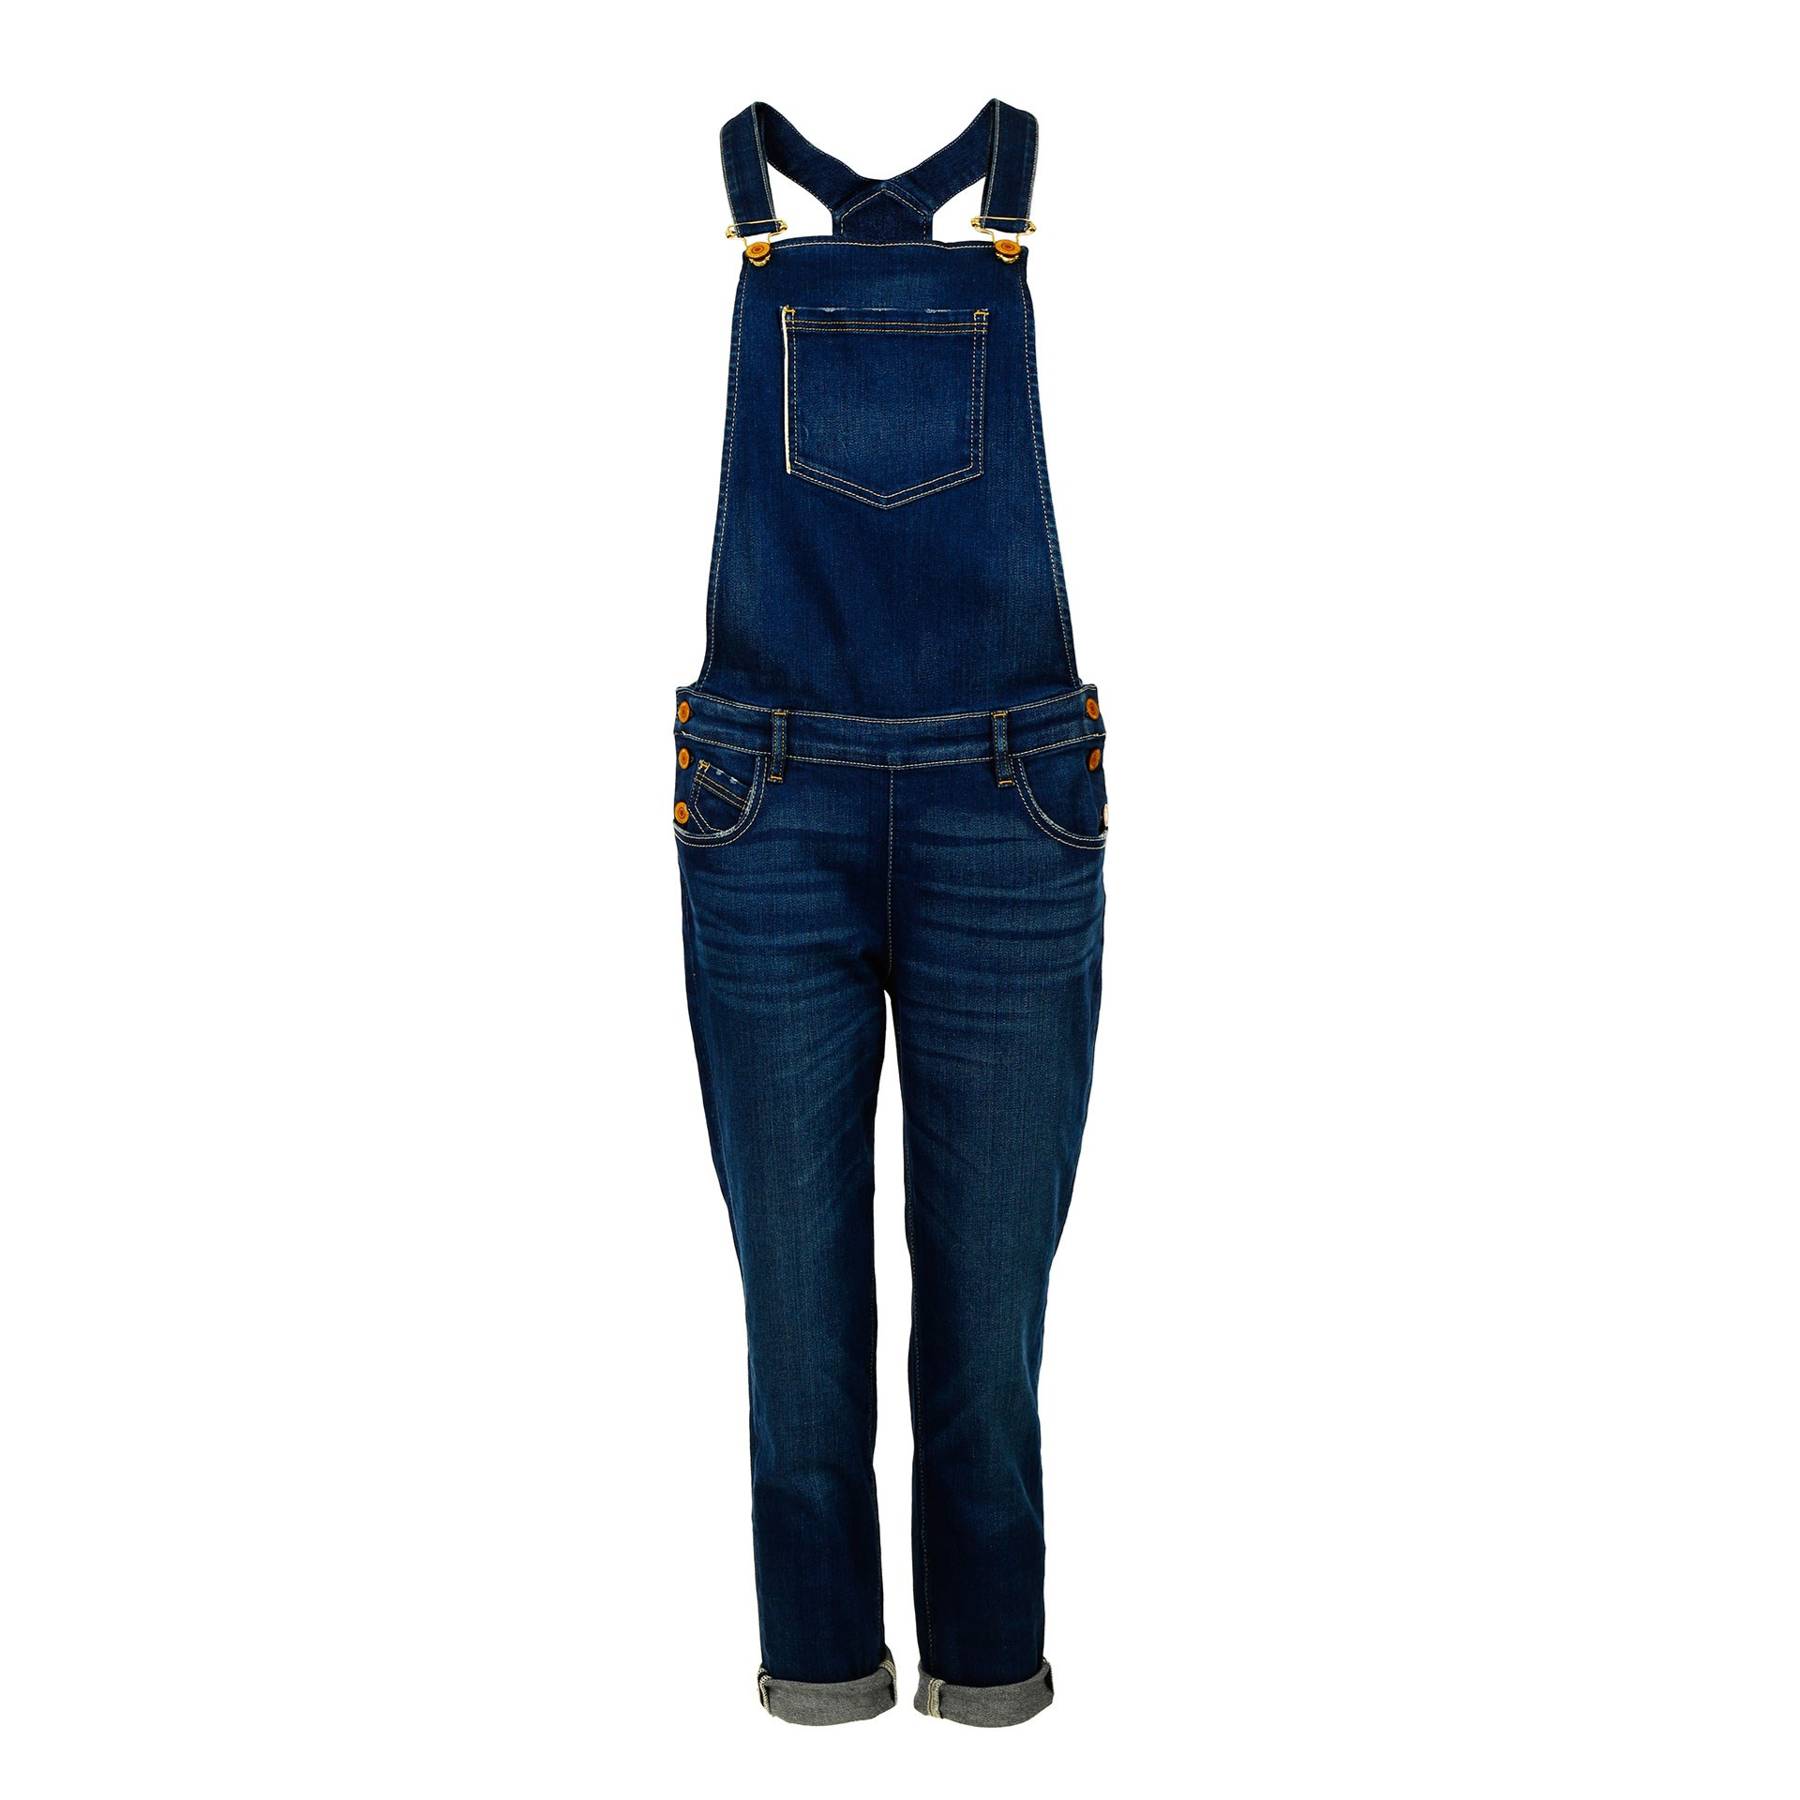 How to wear dungarees spring summer 2017 trend | Glamour UK